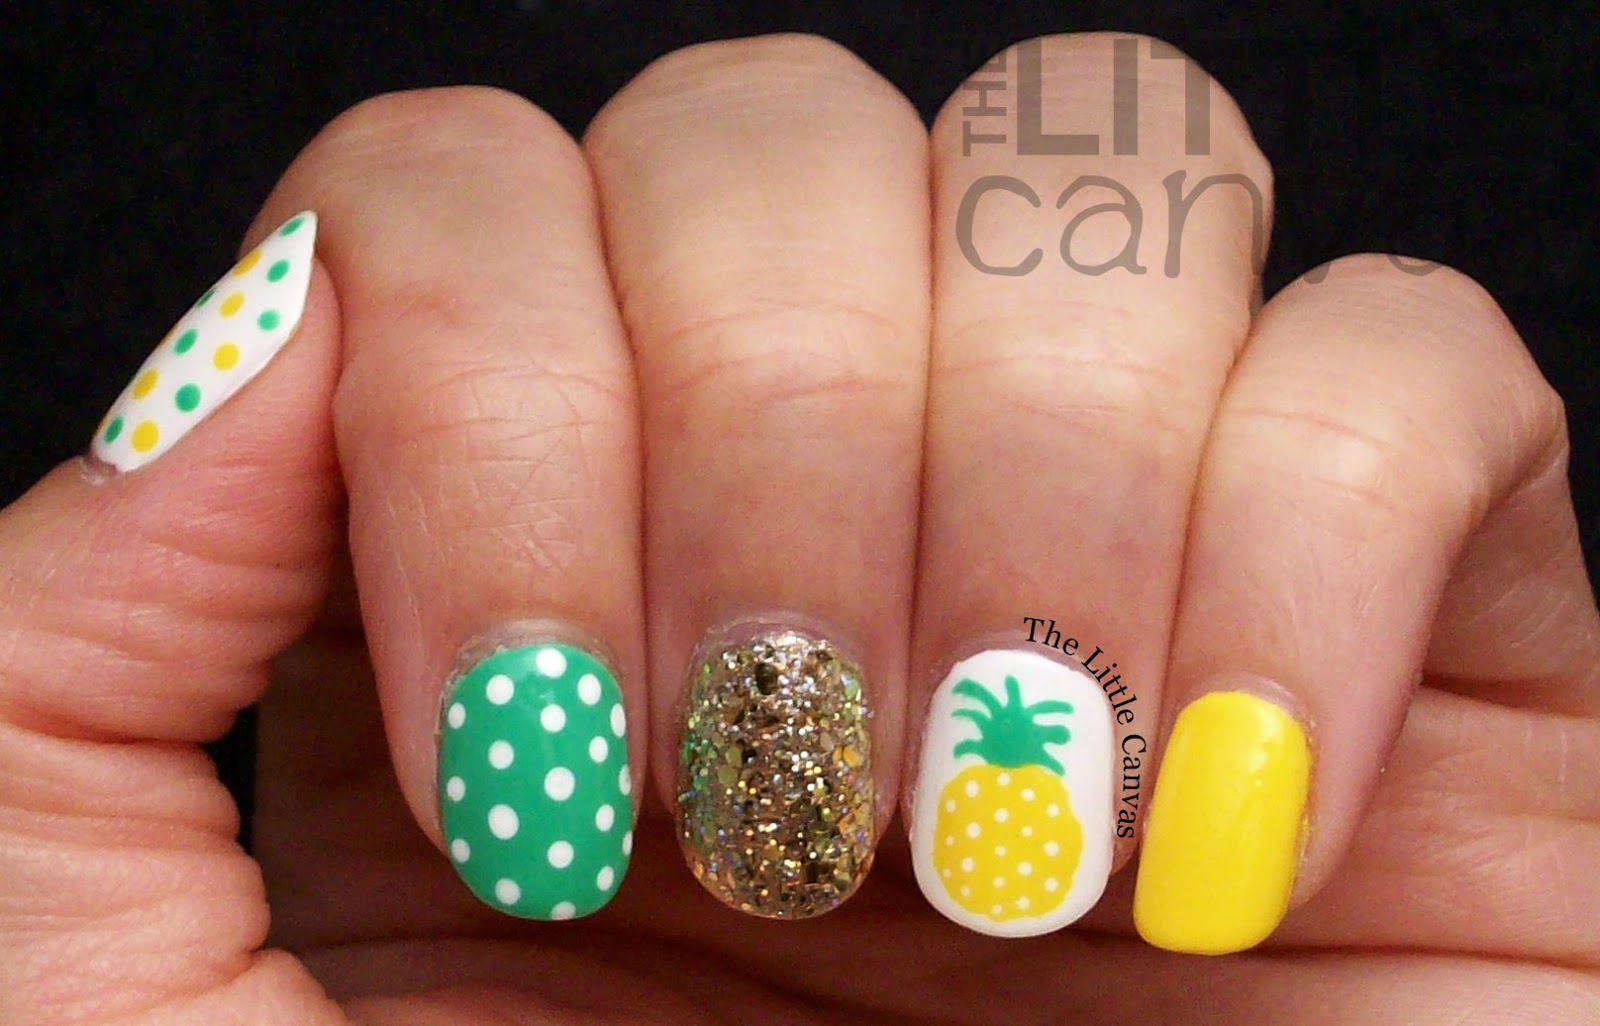 9. "Pineapple Nail Designs for Summer" - wide 3